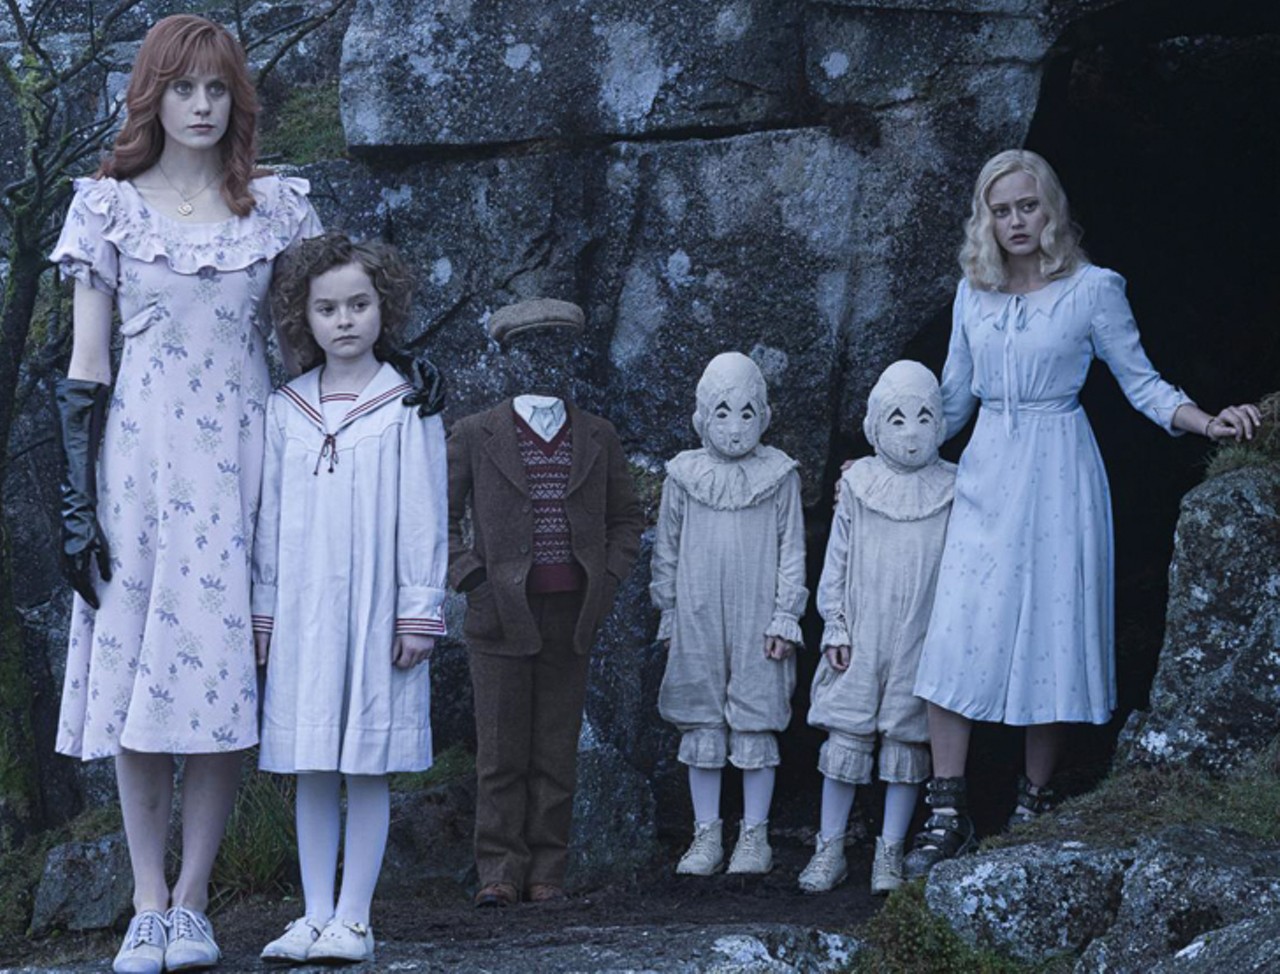 Miss Peregrine's Home for Peculiar Children (2016)
Location: St. Petersburg, Largo
One of two films Burton has opted to film in Tampa Bay, the main character&#146;s house, and all its peculiarity, can be found in Largo.See for yourself on YouTube, Amazon Prime, Google Play, Vudu, and Hulu.
Photo via Tim Burton Productions